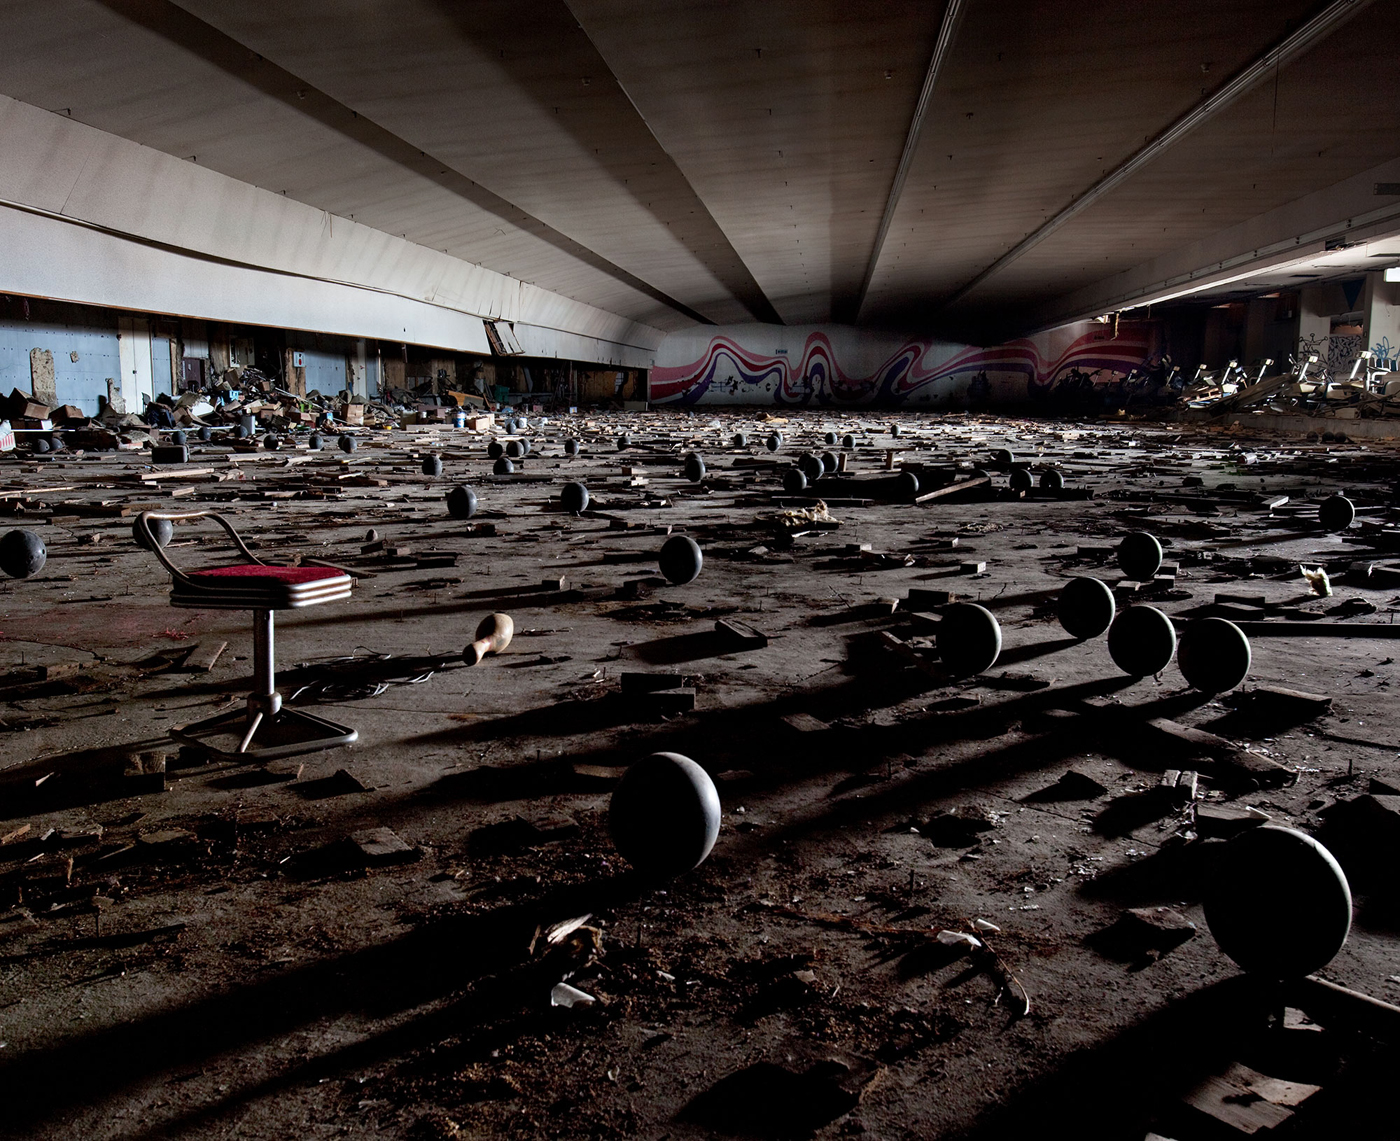 The abandoned Kanagawa Toyo bowling alley in Yokohama, Japan. Opened in 1987 with 108 lanes, the alley fell on hard times in the early 1990s. Photograph by Thomas Jorion, 2009.